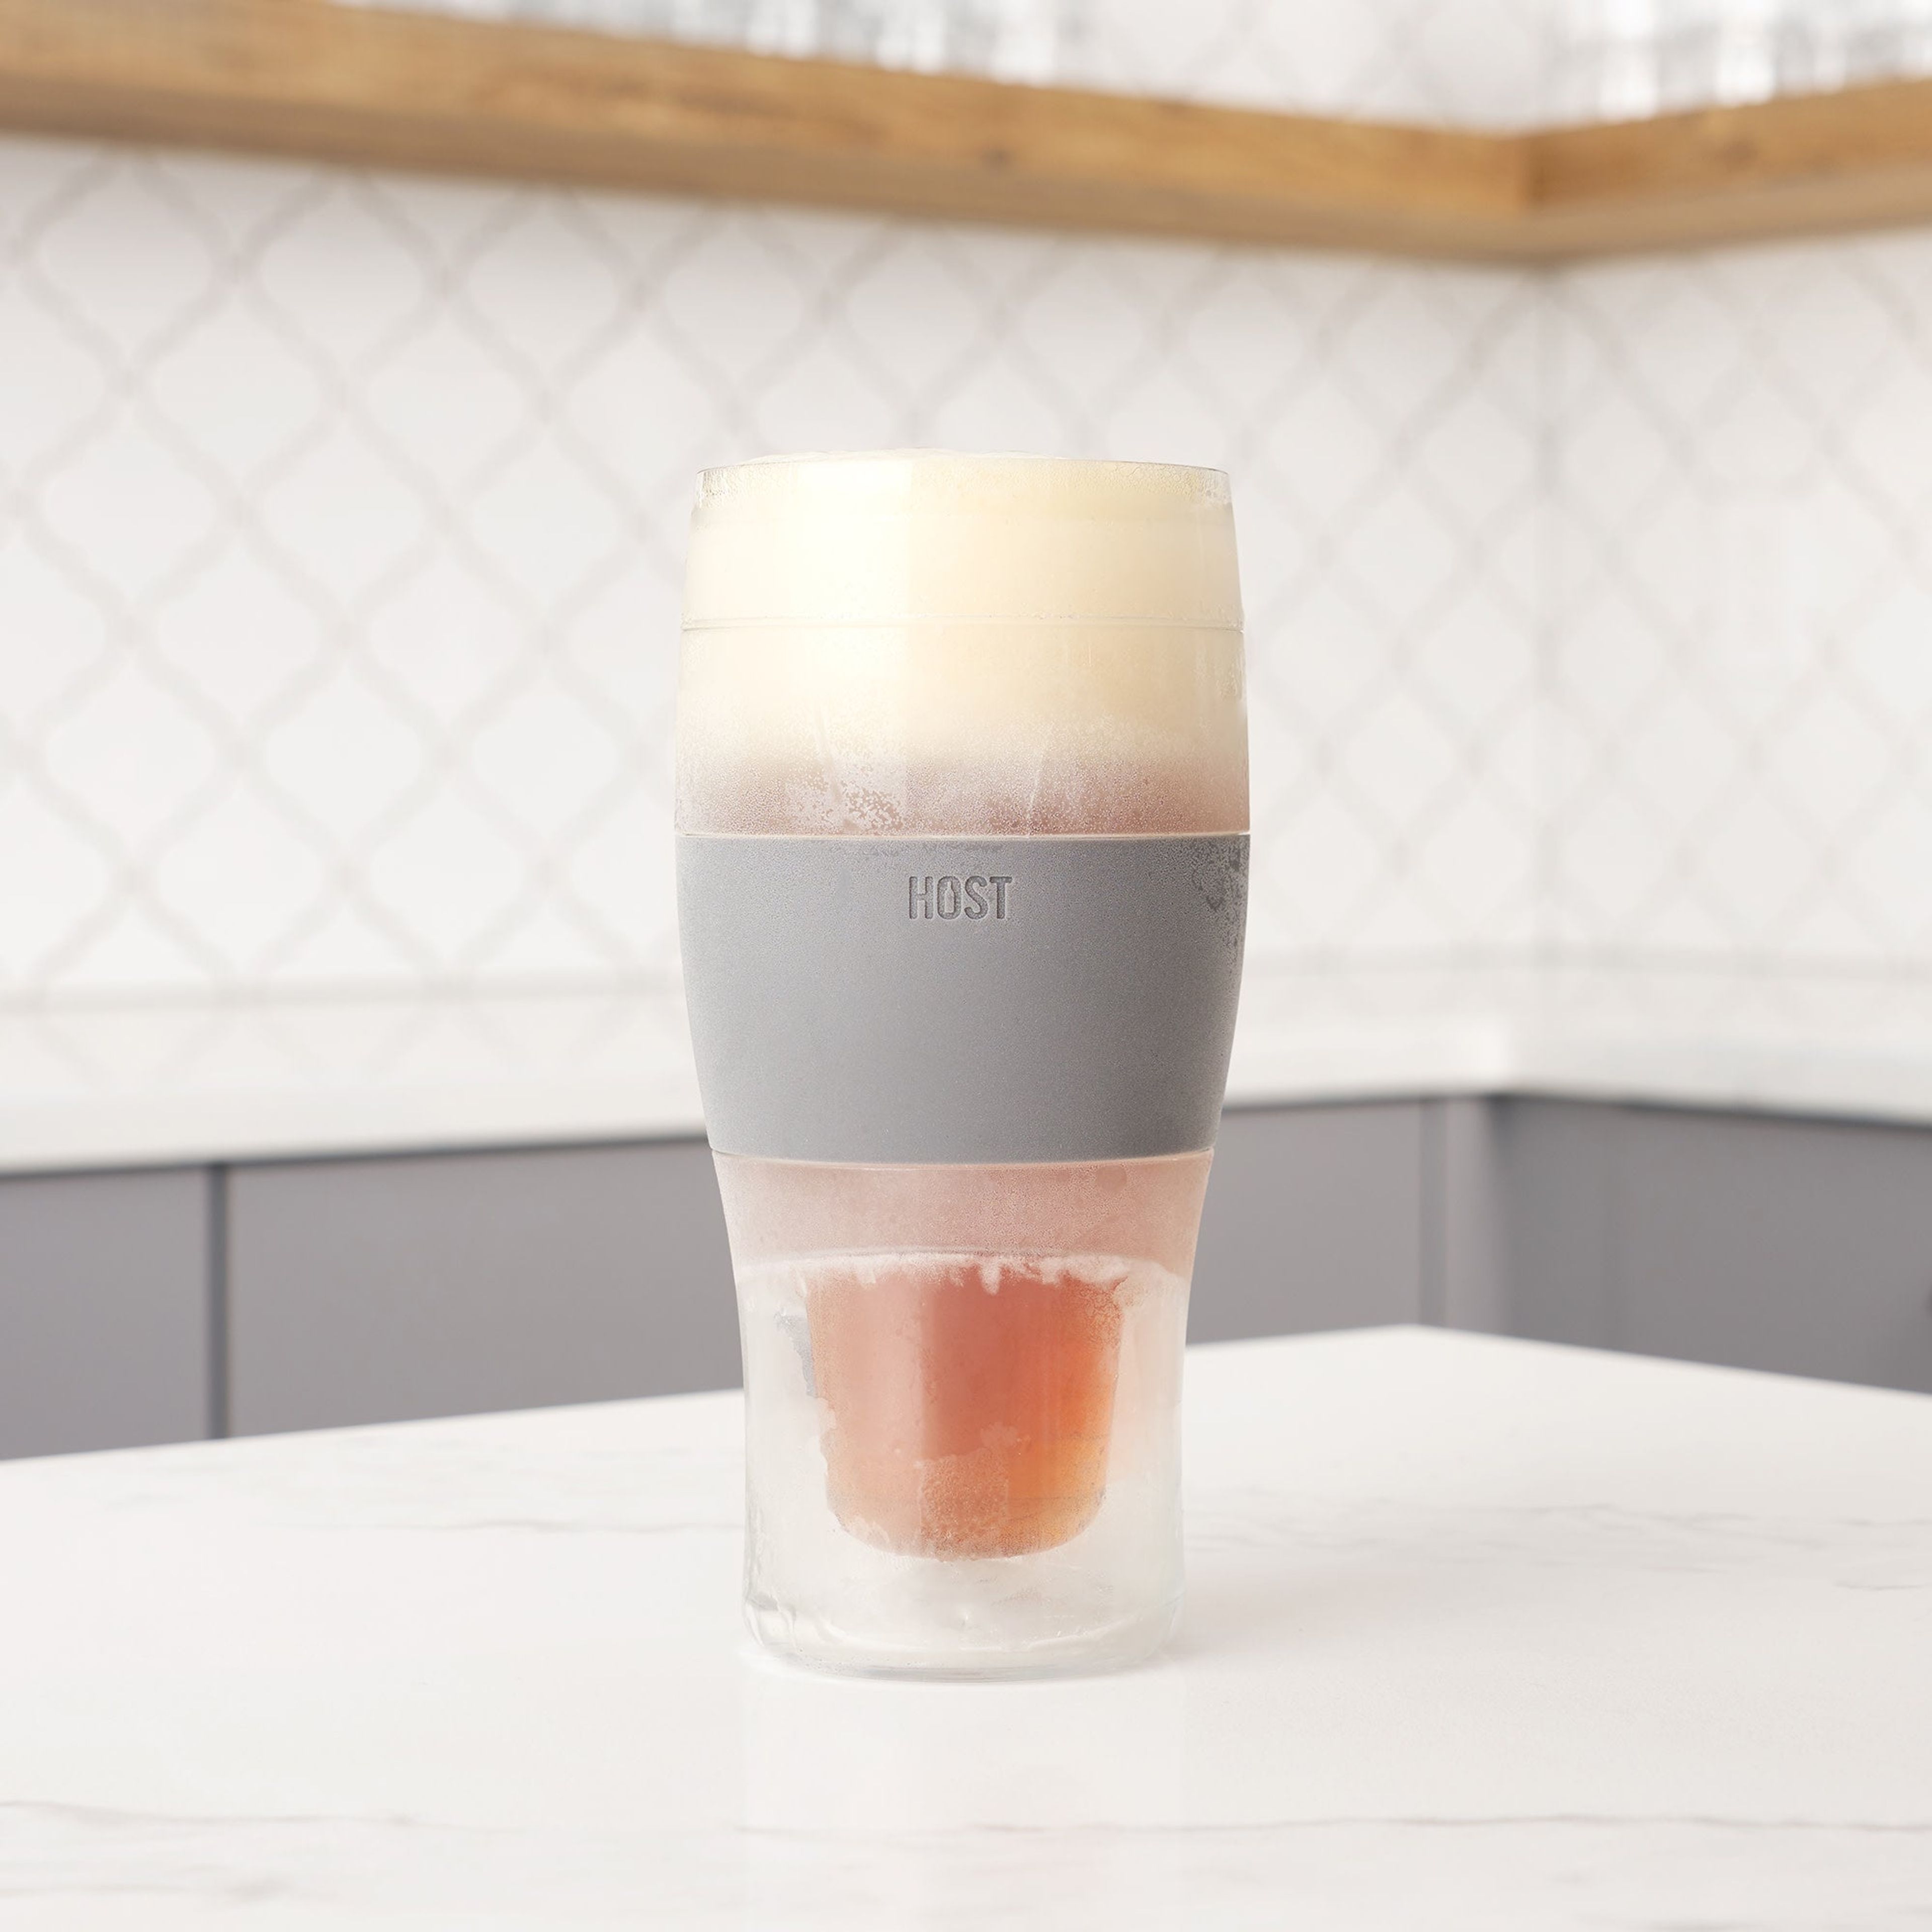 Beer FREEZE Cooling Cup in Grey